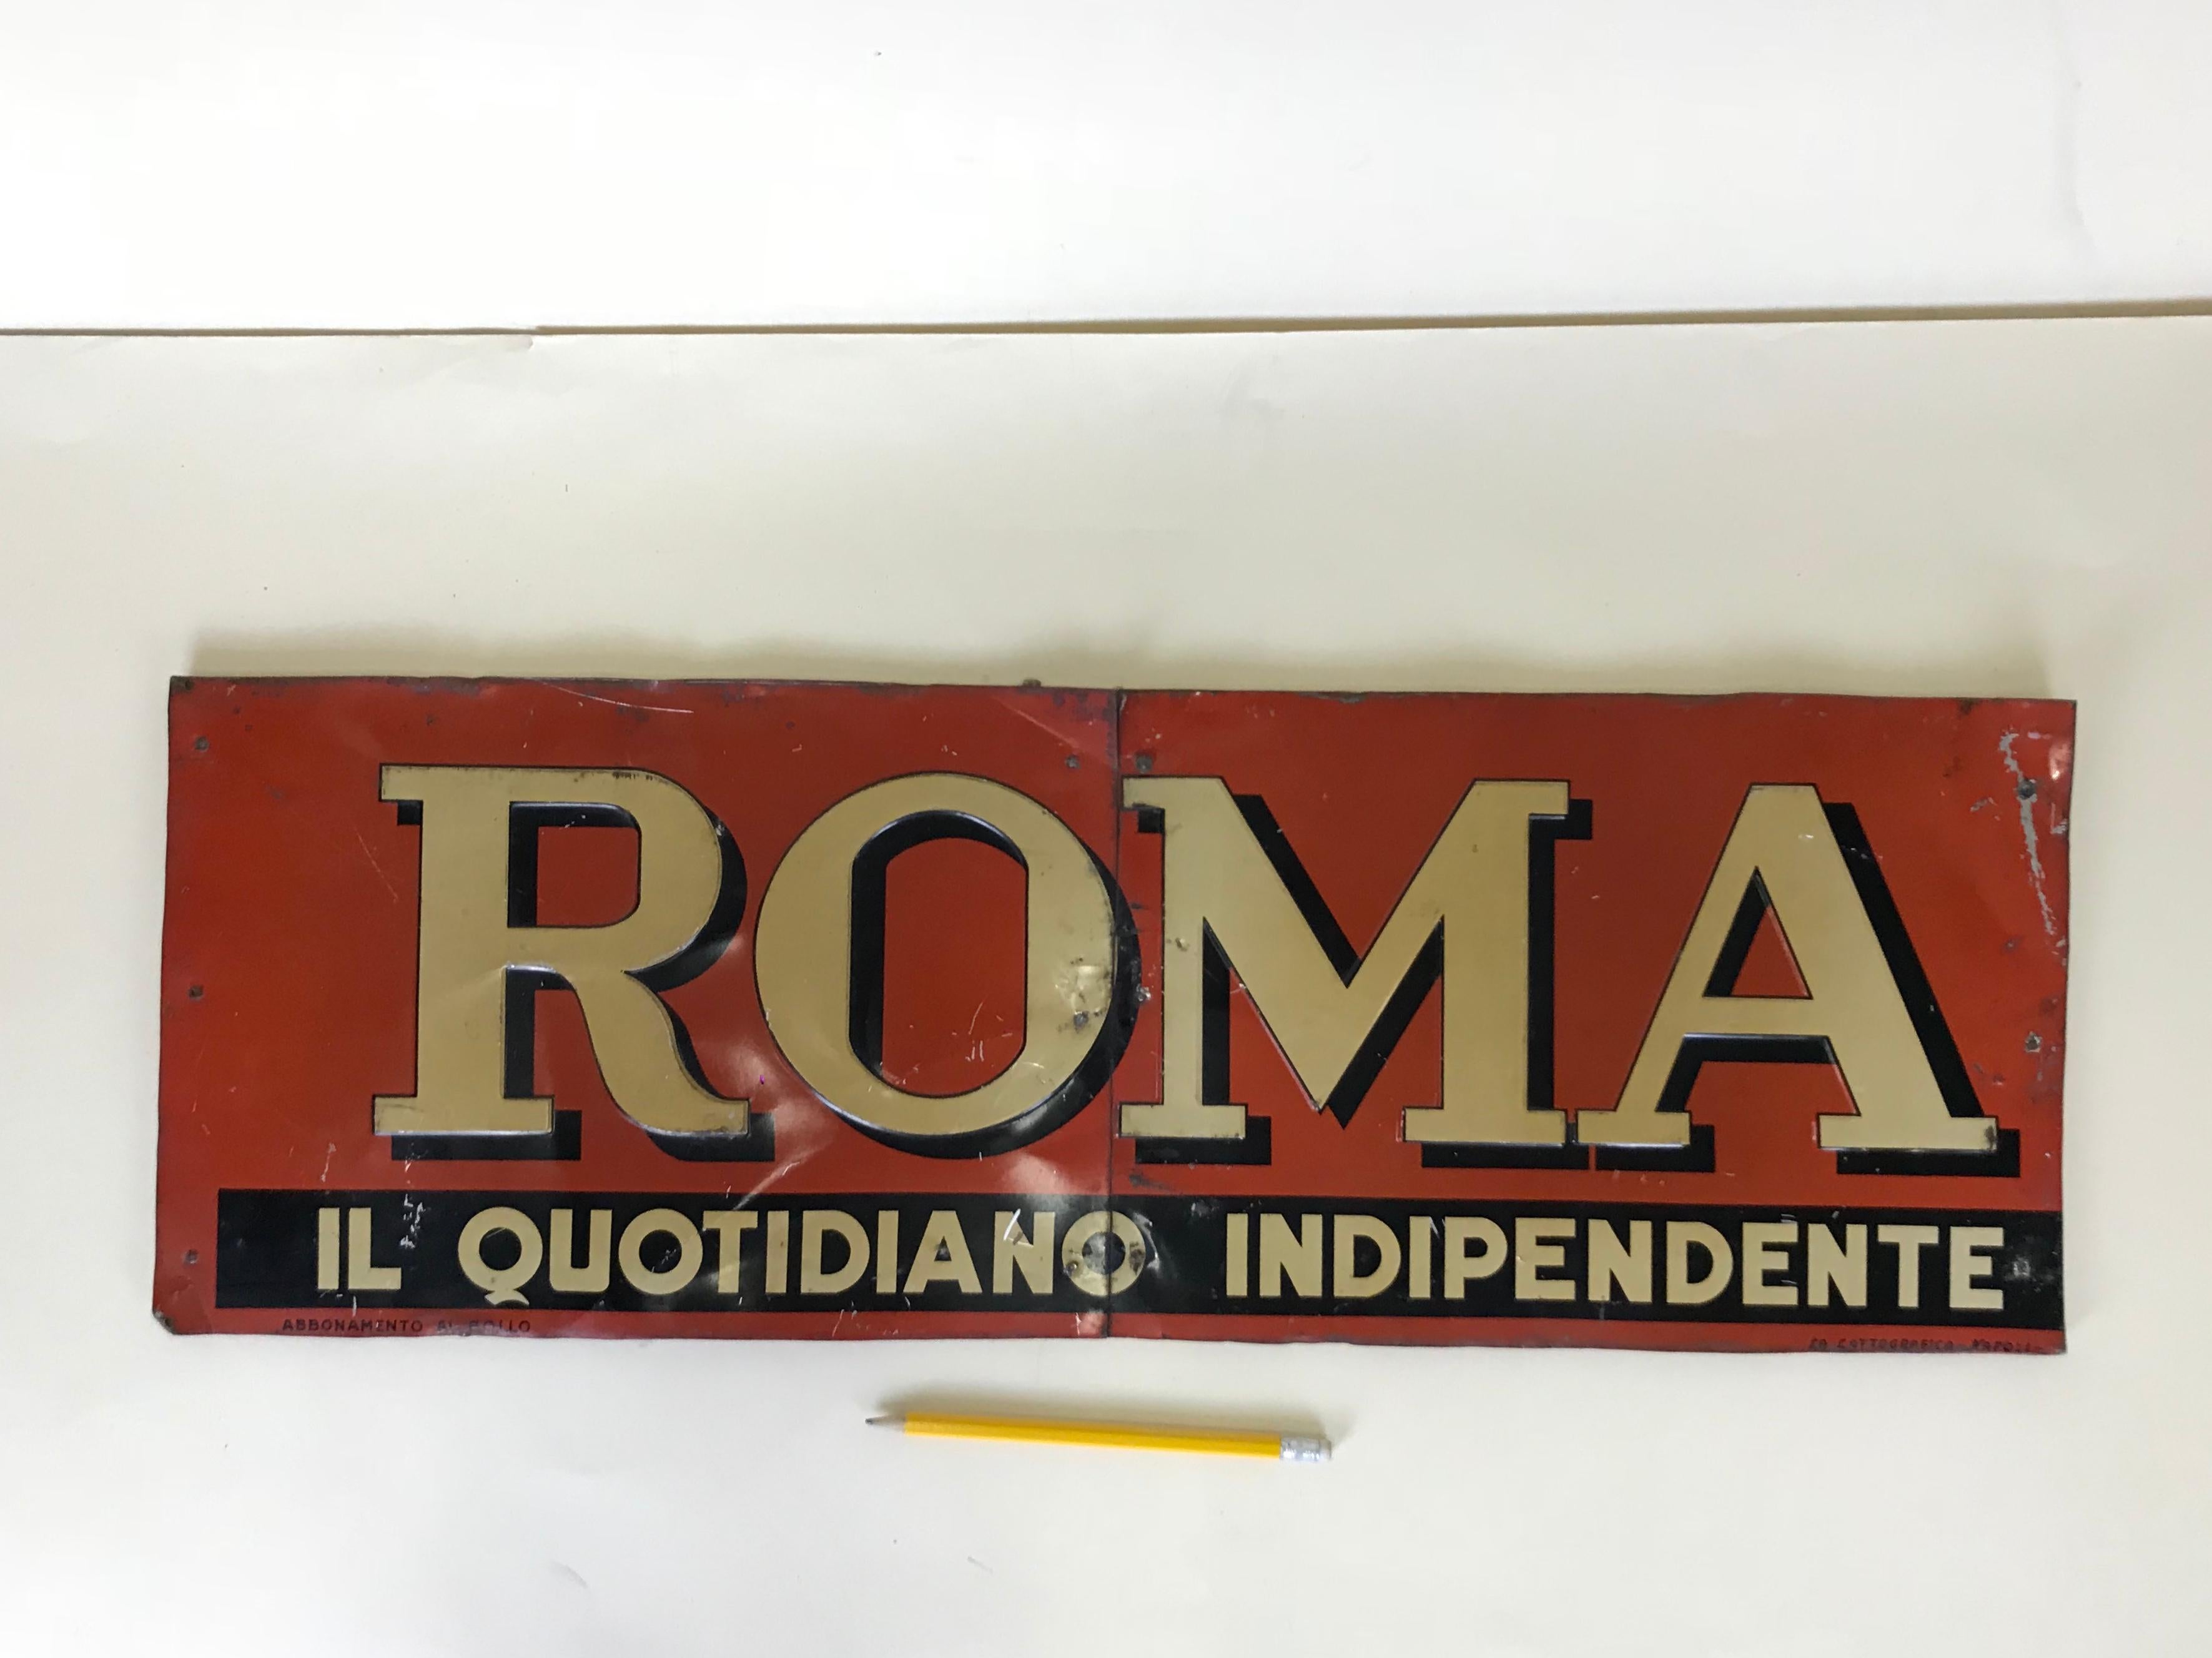 1950s Italian Vintage Transferpinted Red and Cream Roma Newspaper Sign (Mitte des 20. Jahrhunderts)